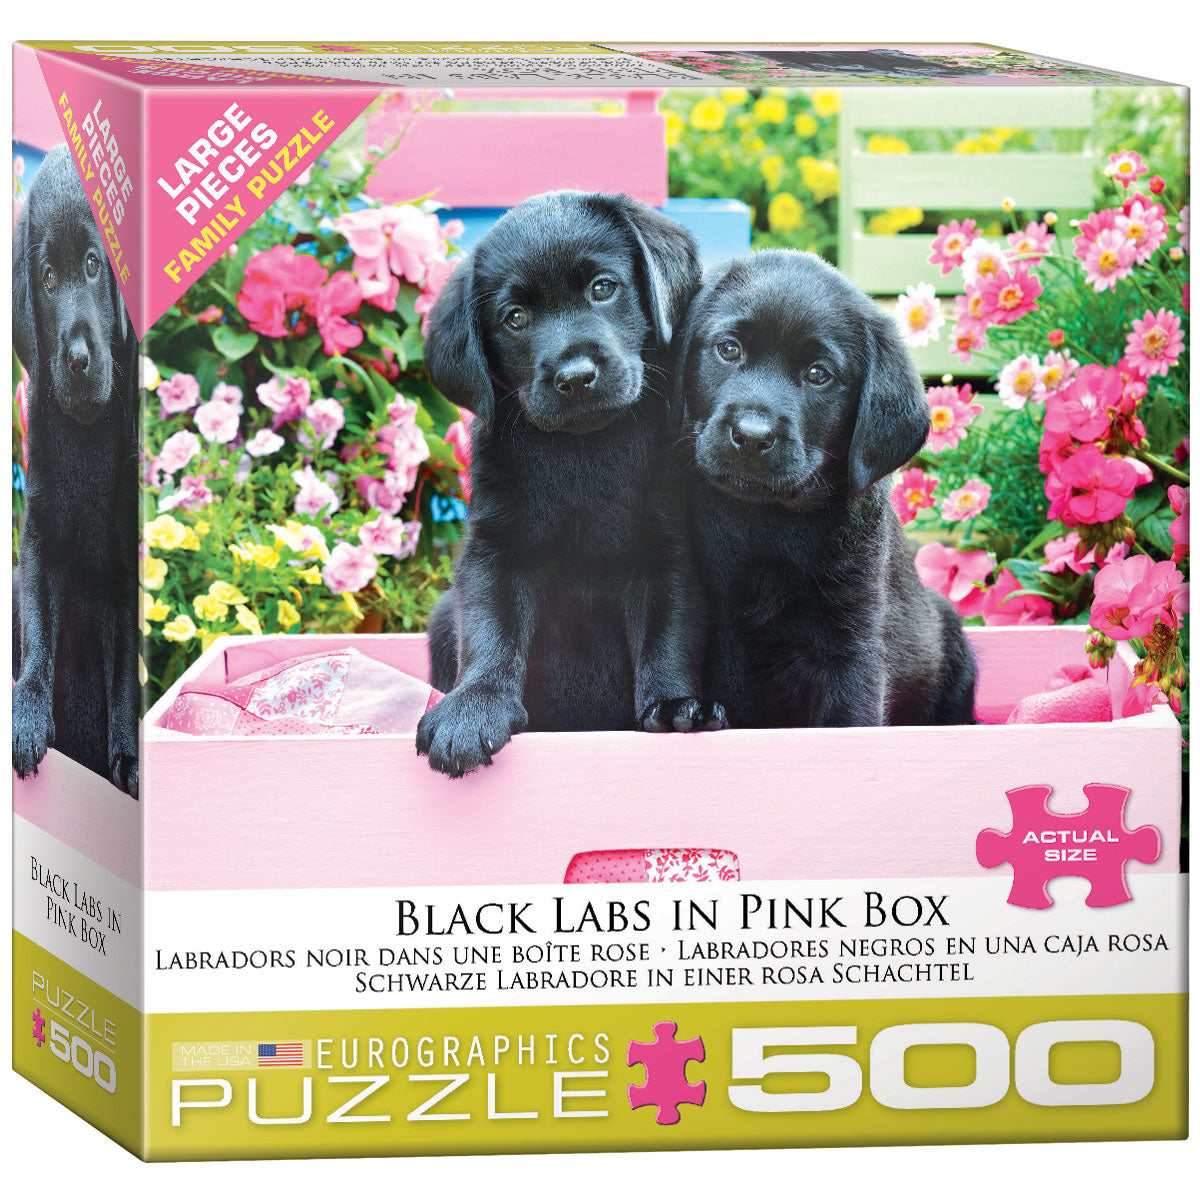 Black Labs in Pink Box